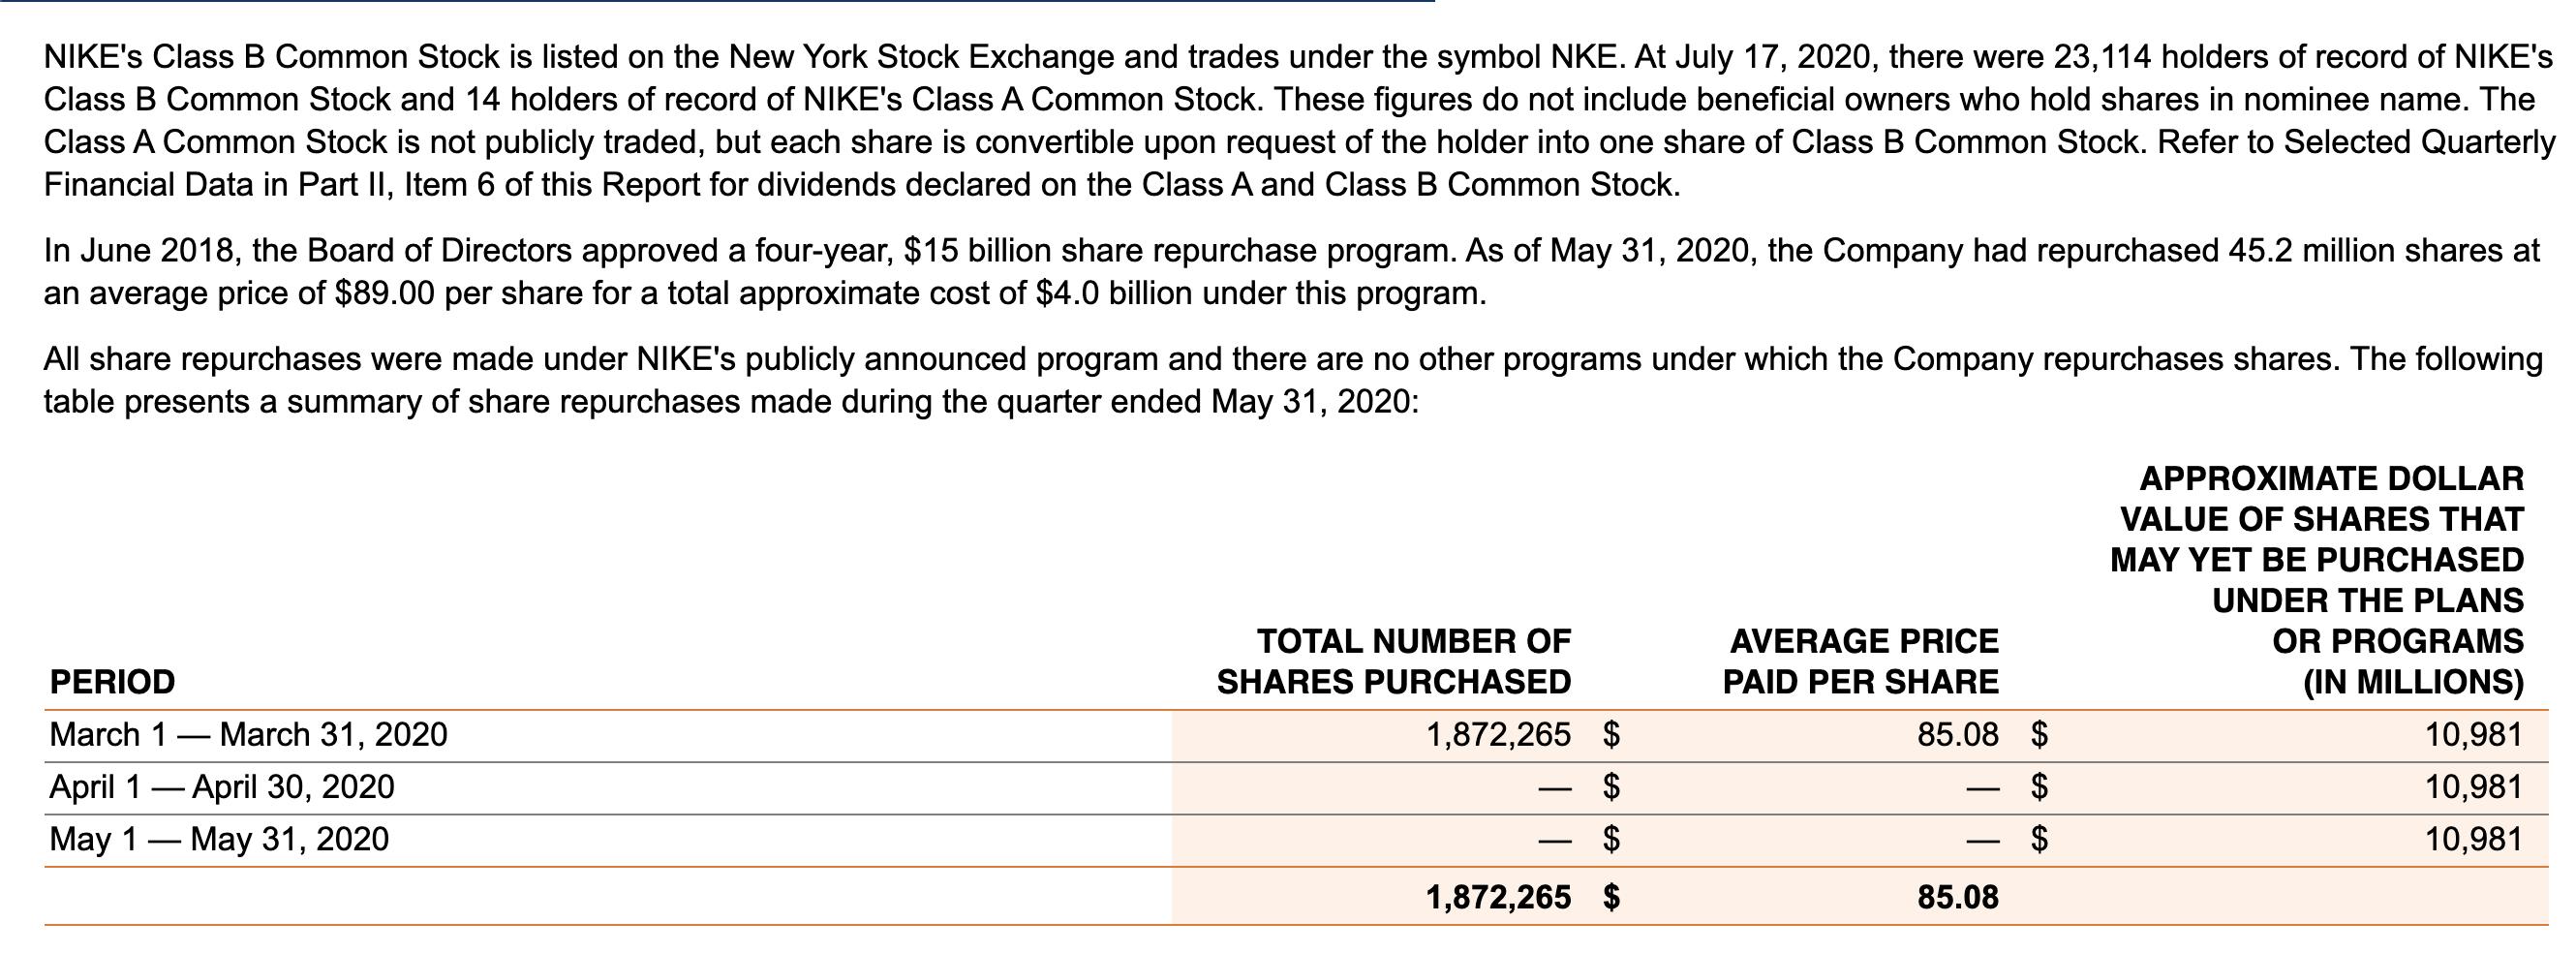 NIKEs Class B Common Stock is listed on the New York Stock Exchange and trades under the symbol NKE. At July 17, 2020, there